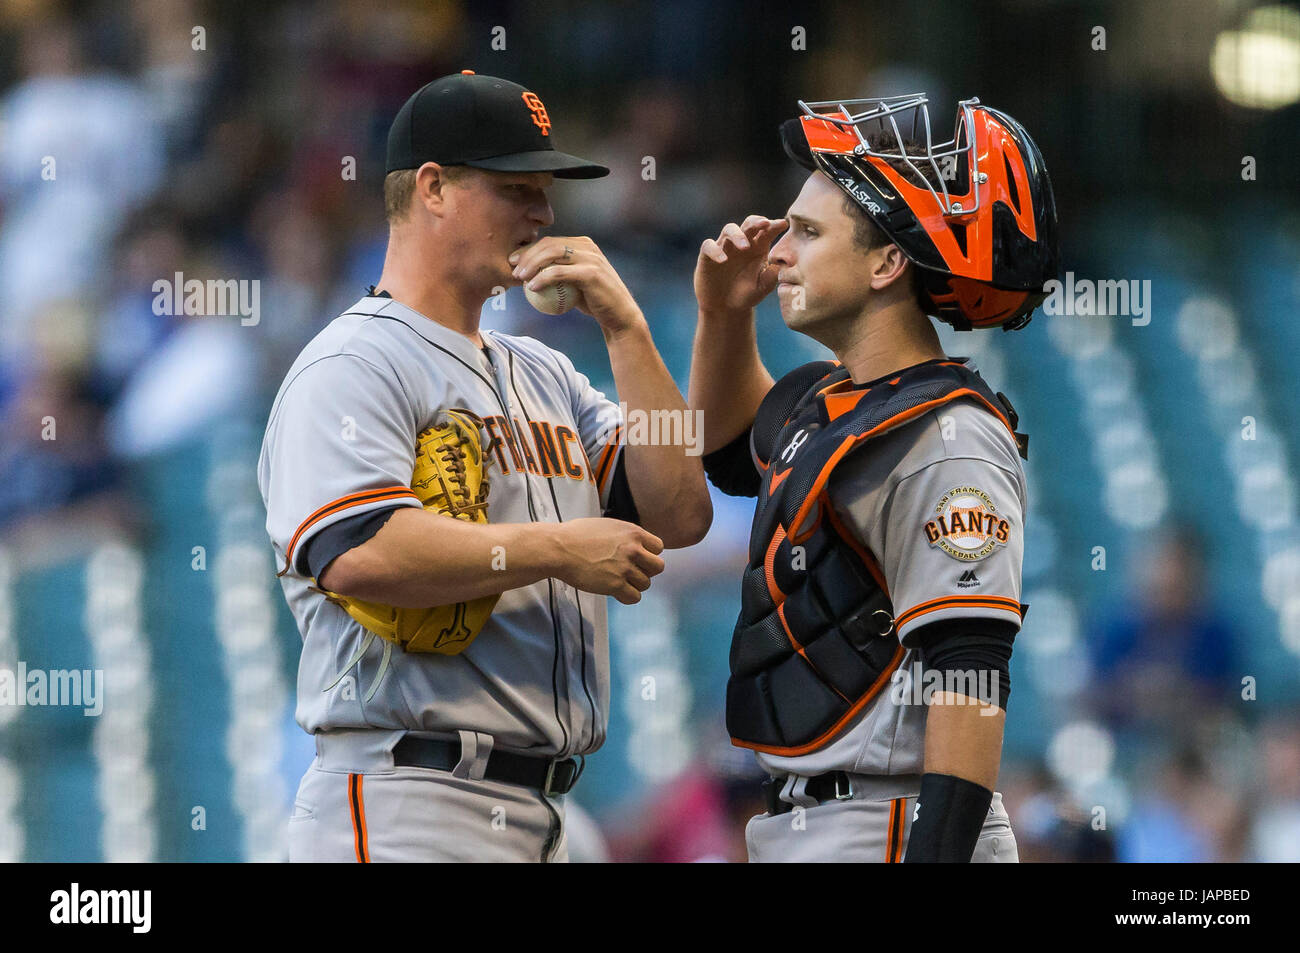 Milwaukee, WI, USA. 6th June, 2017. San Francisco Giants catcher Buster Posey #28 talks with San Francisco Giants starting pitcher Matt Cain #18 during the Major League Baseball game between the Milwaukee Brewers and the San Francisco Giants at Miller Park in Milwaukee, WI. John Fisher/CSM/Alamy Live News Stock Photo